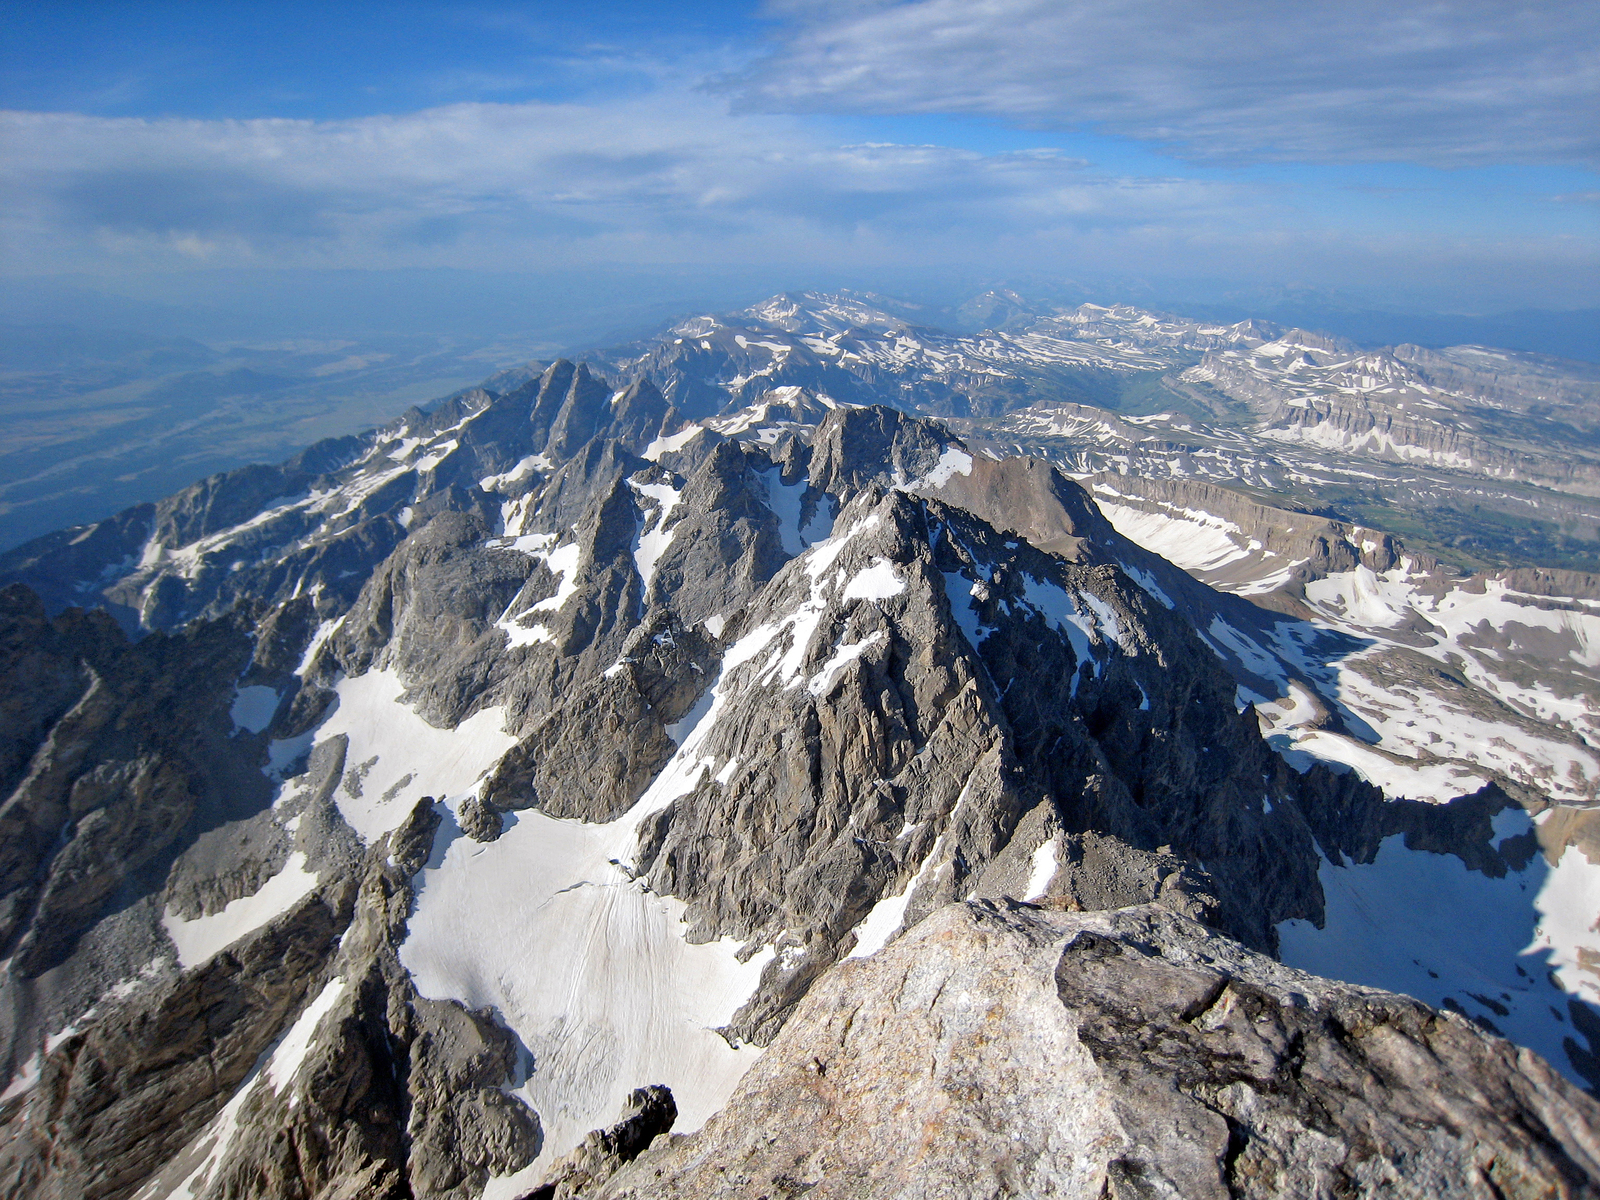 looking south down the Teton crest, Grand Teton National Park, Wyoming